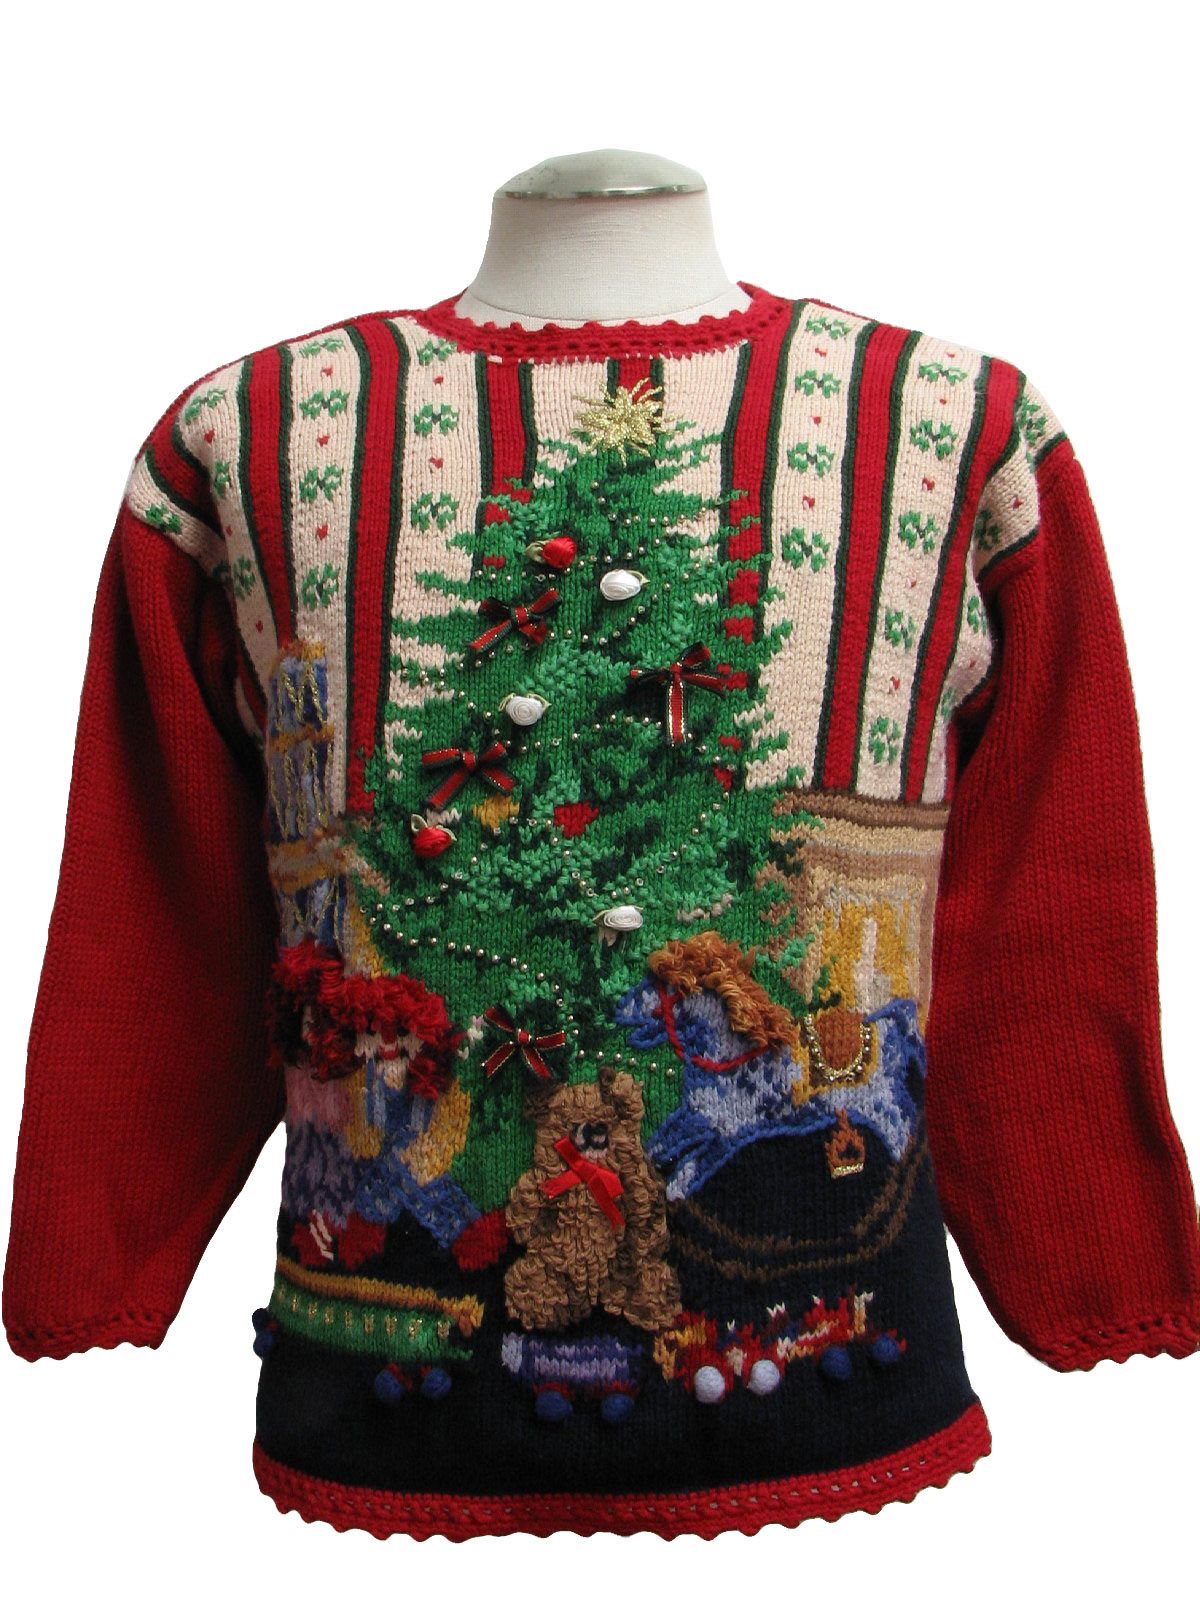 Super Ugly Christmas Sweater: -Heirloom Collectibles- Unisex red ...